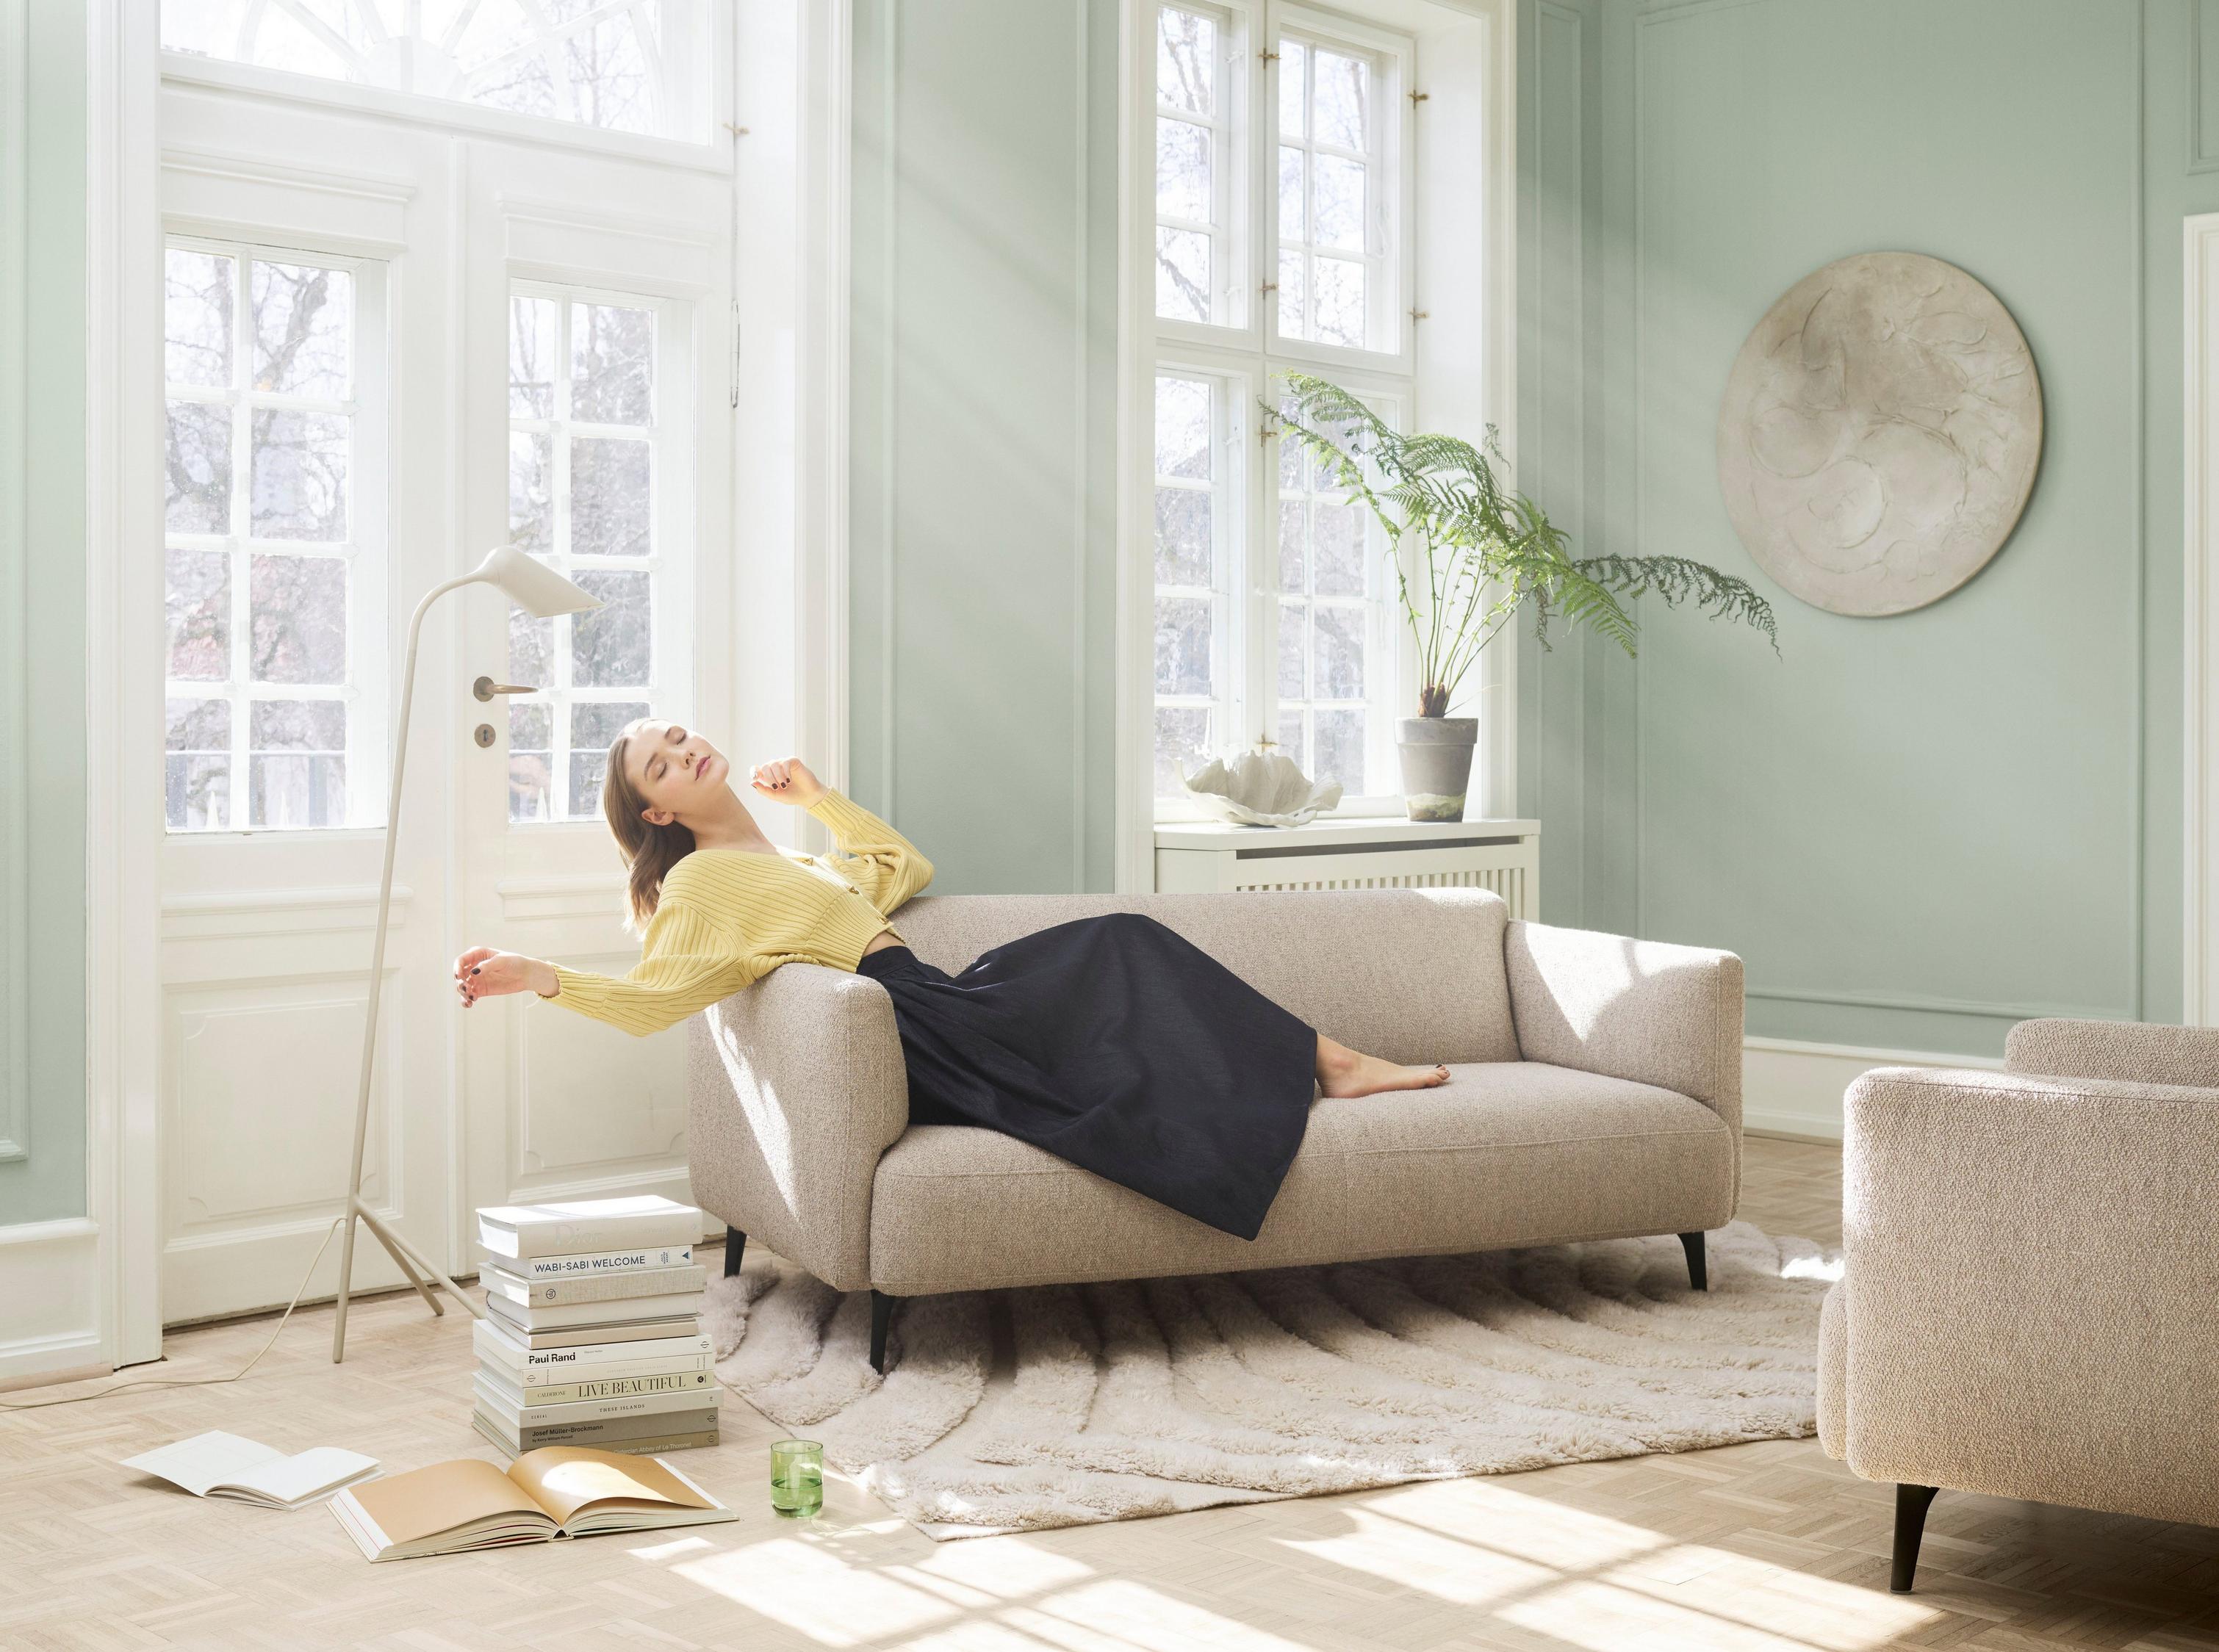 Woman lounging on the Modena sofa in a light-filled living room